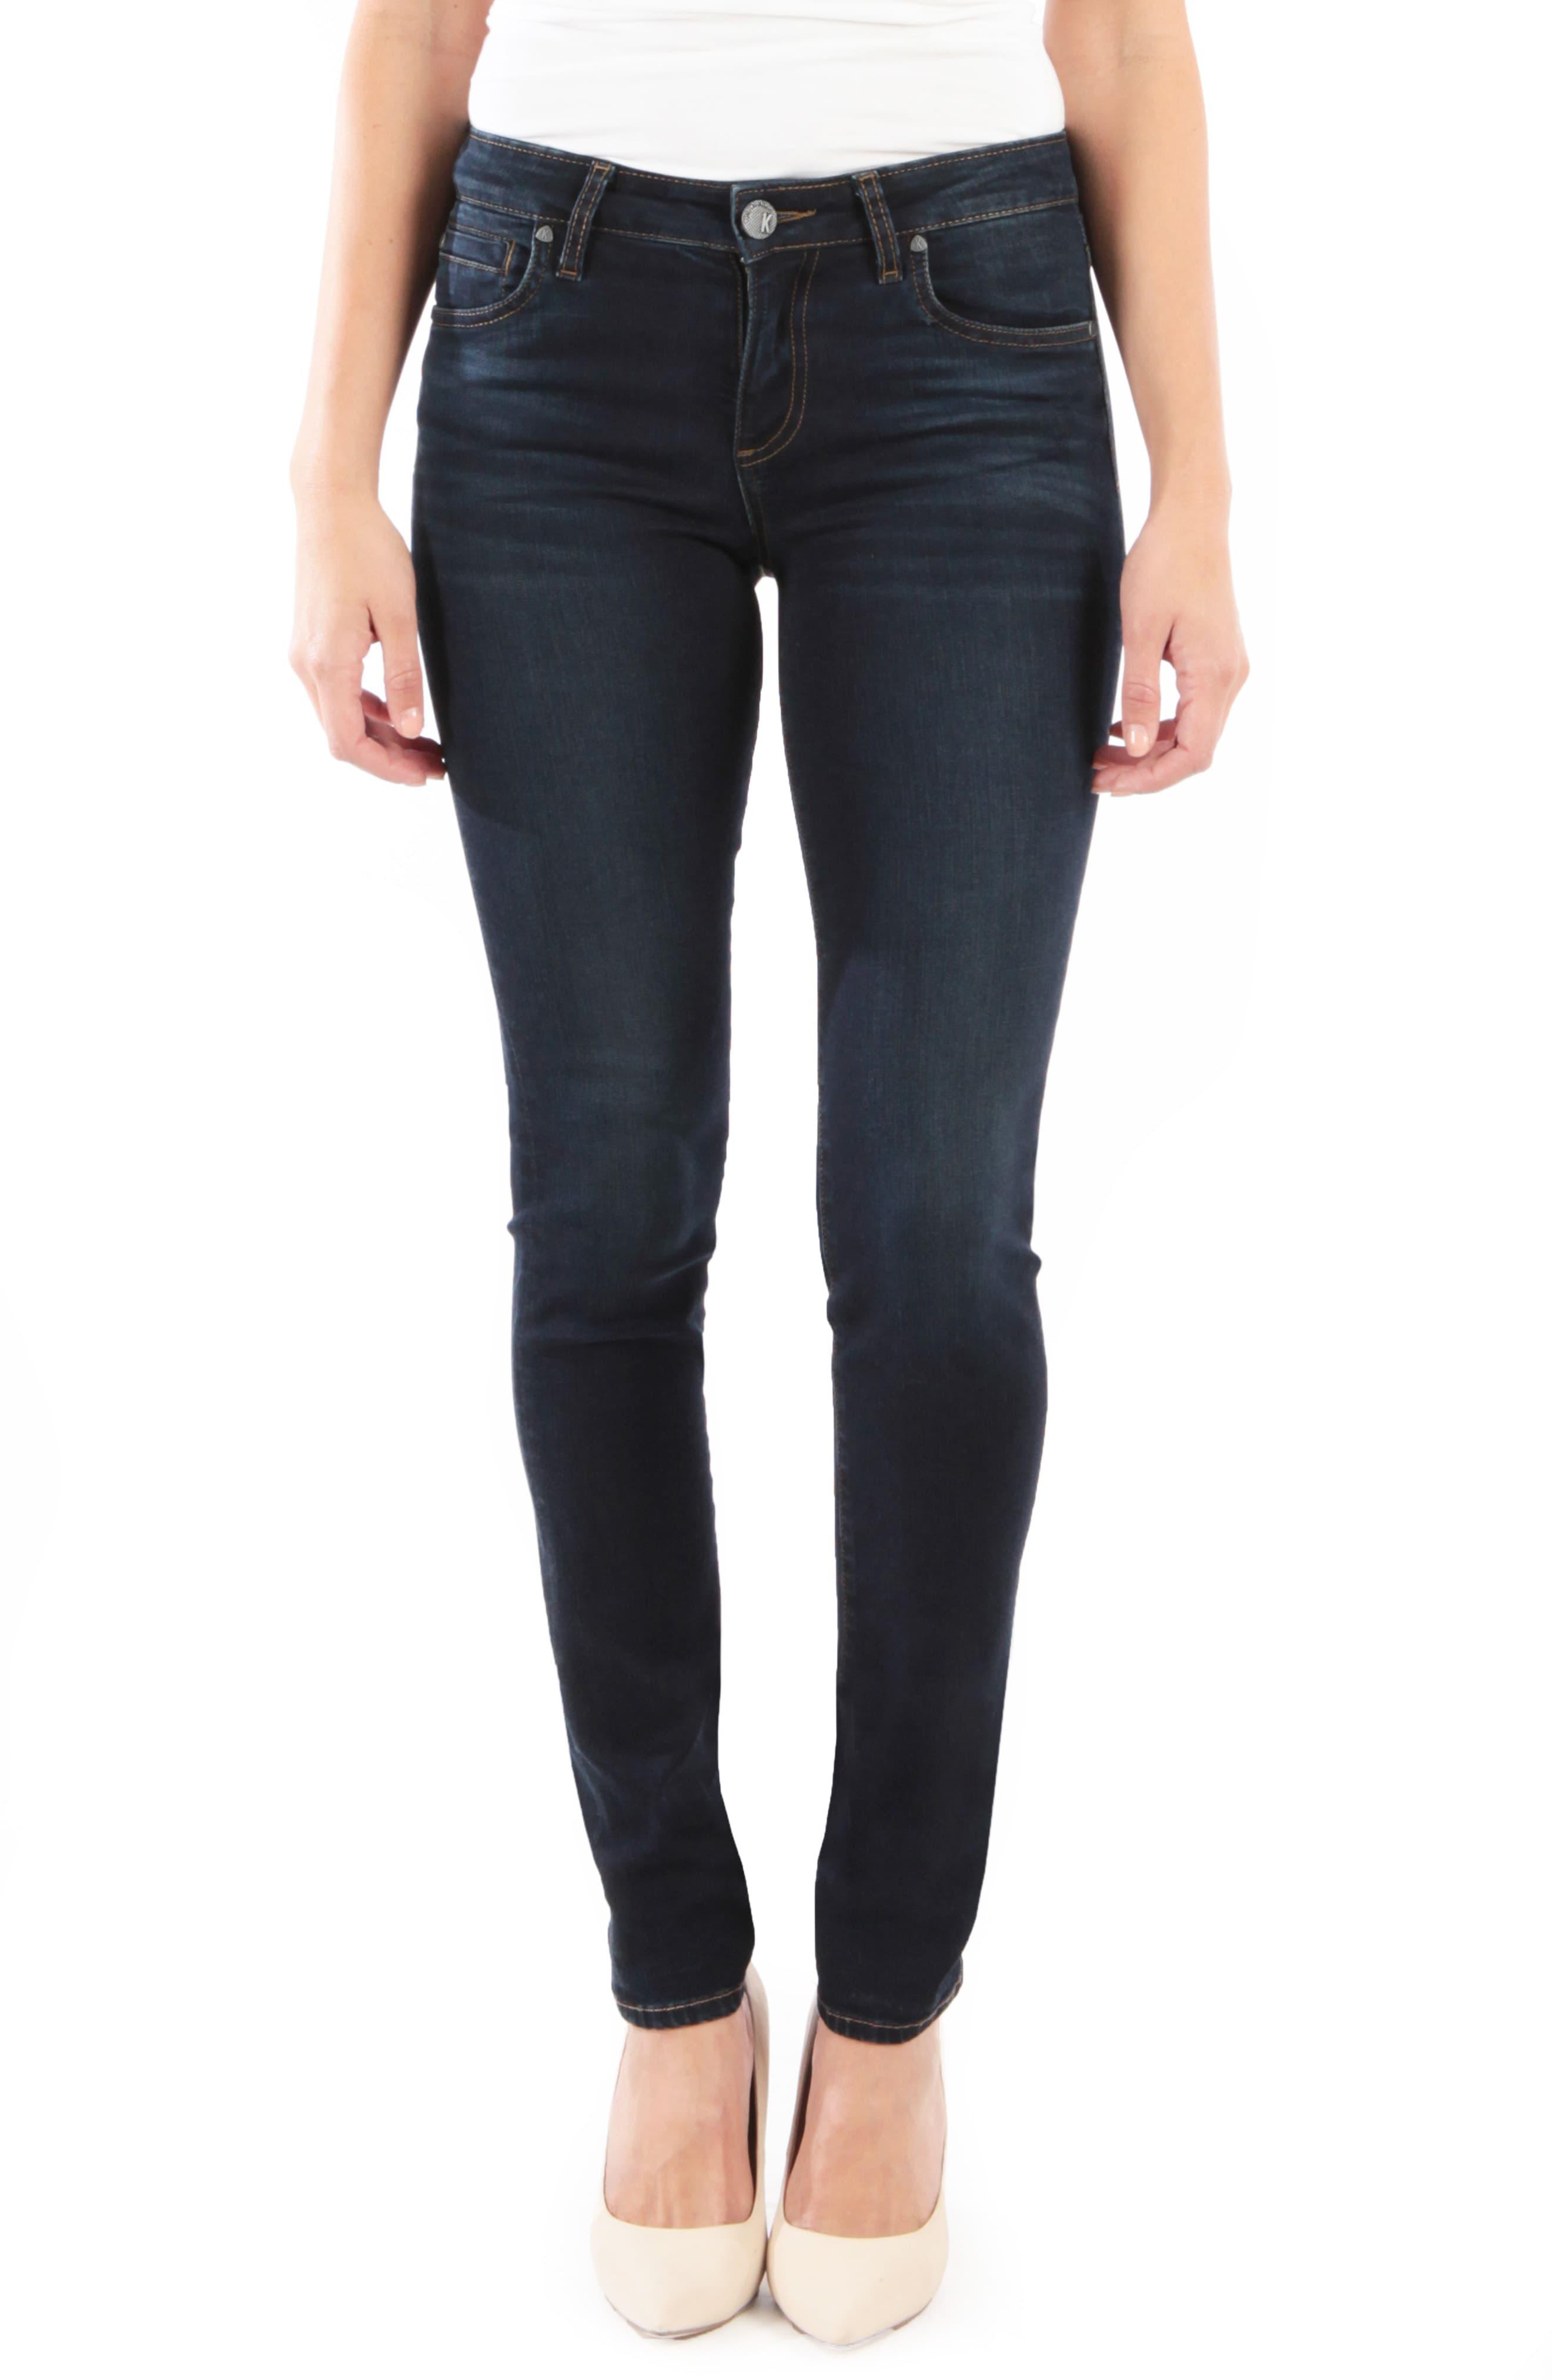 Kut From The Kloth Denim Diana Relaxed Fit Skinny Jeans in Blue - Lyst